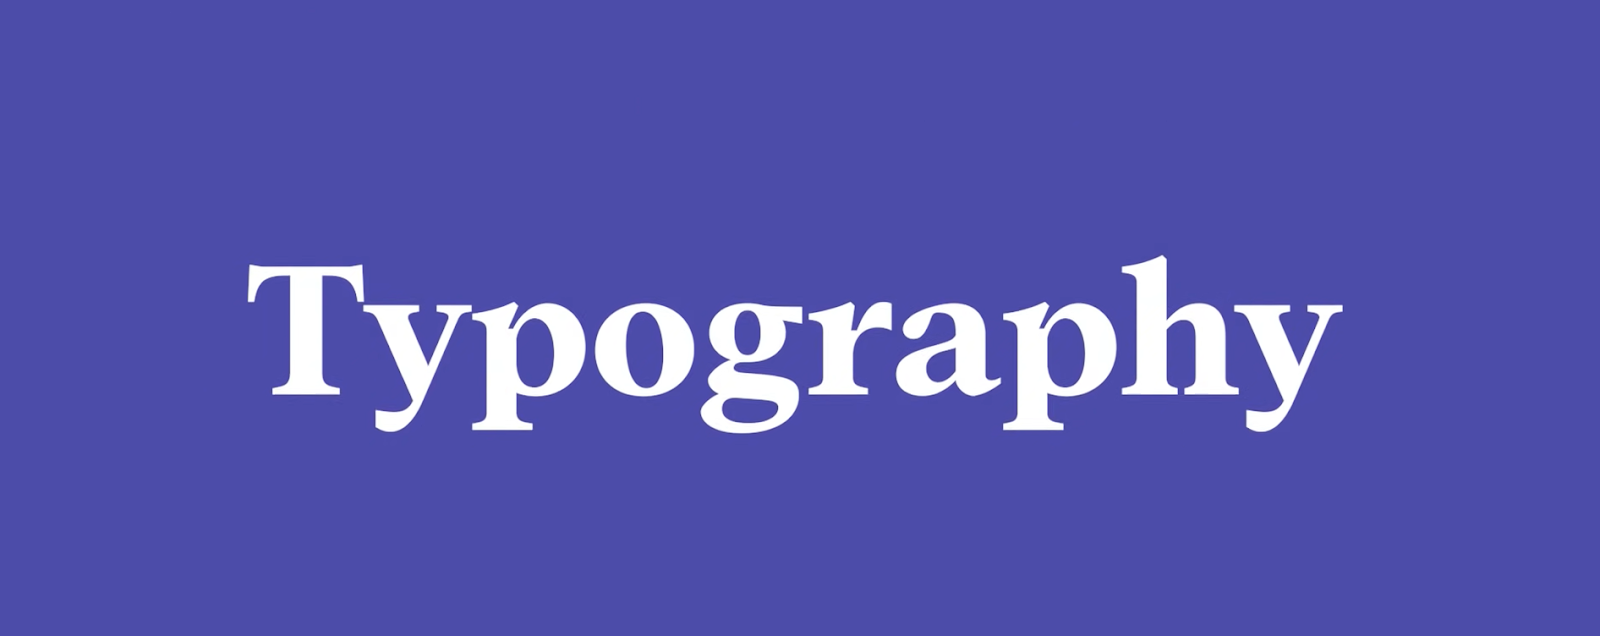 The word "Typography" in white serif font on a purple background